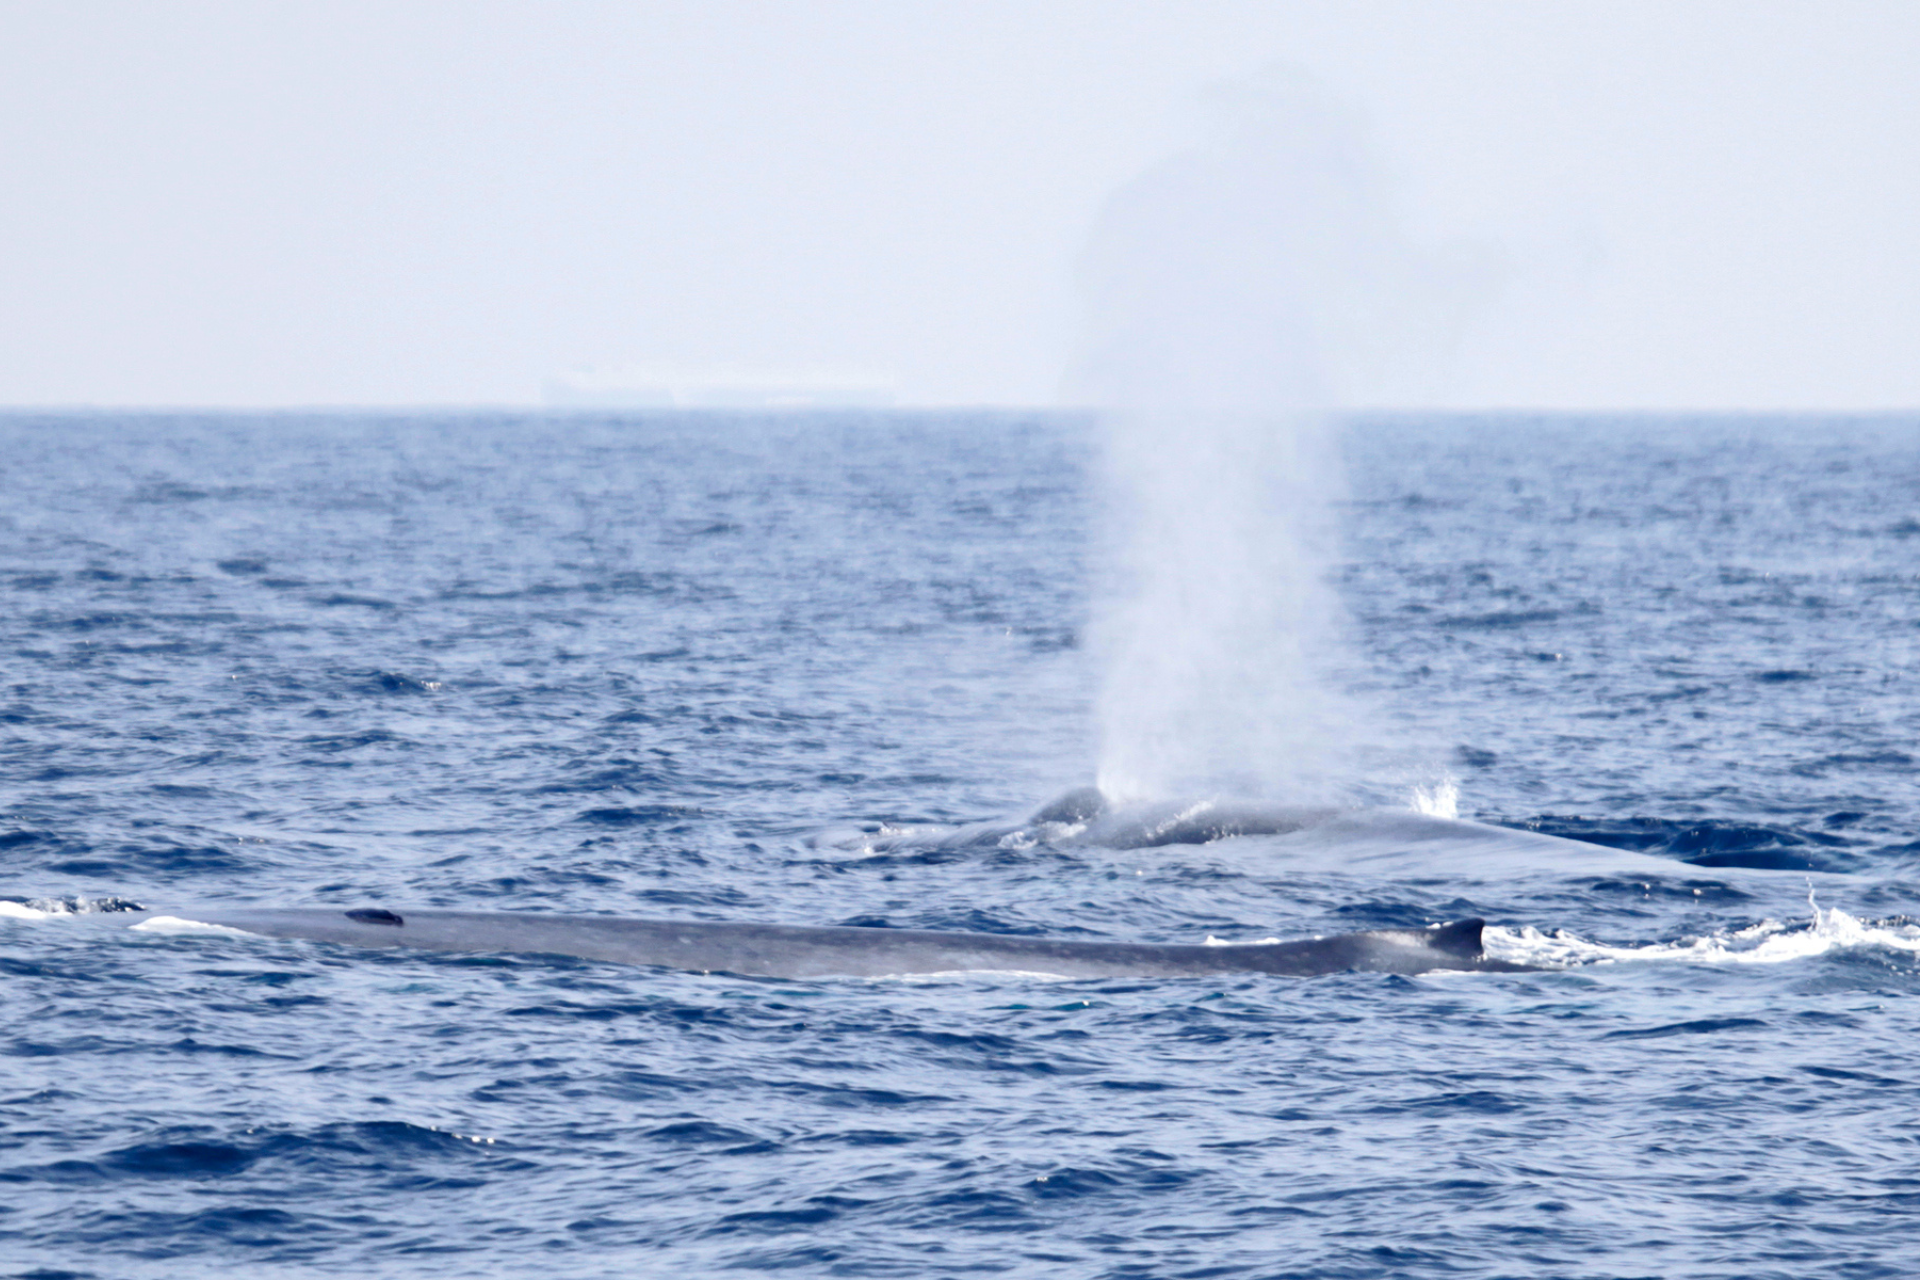 Two blue whales spotted on a whale watching tour in Trincomalee, Sri Lanka